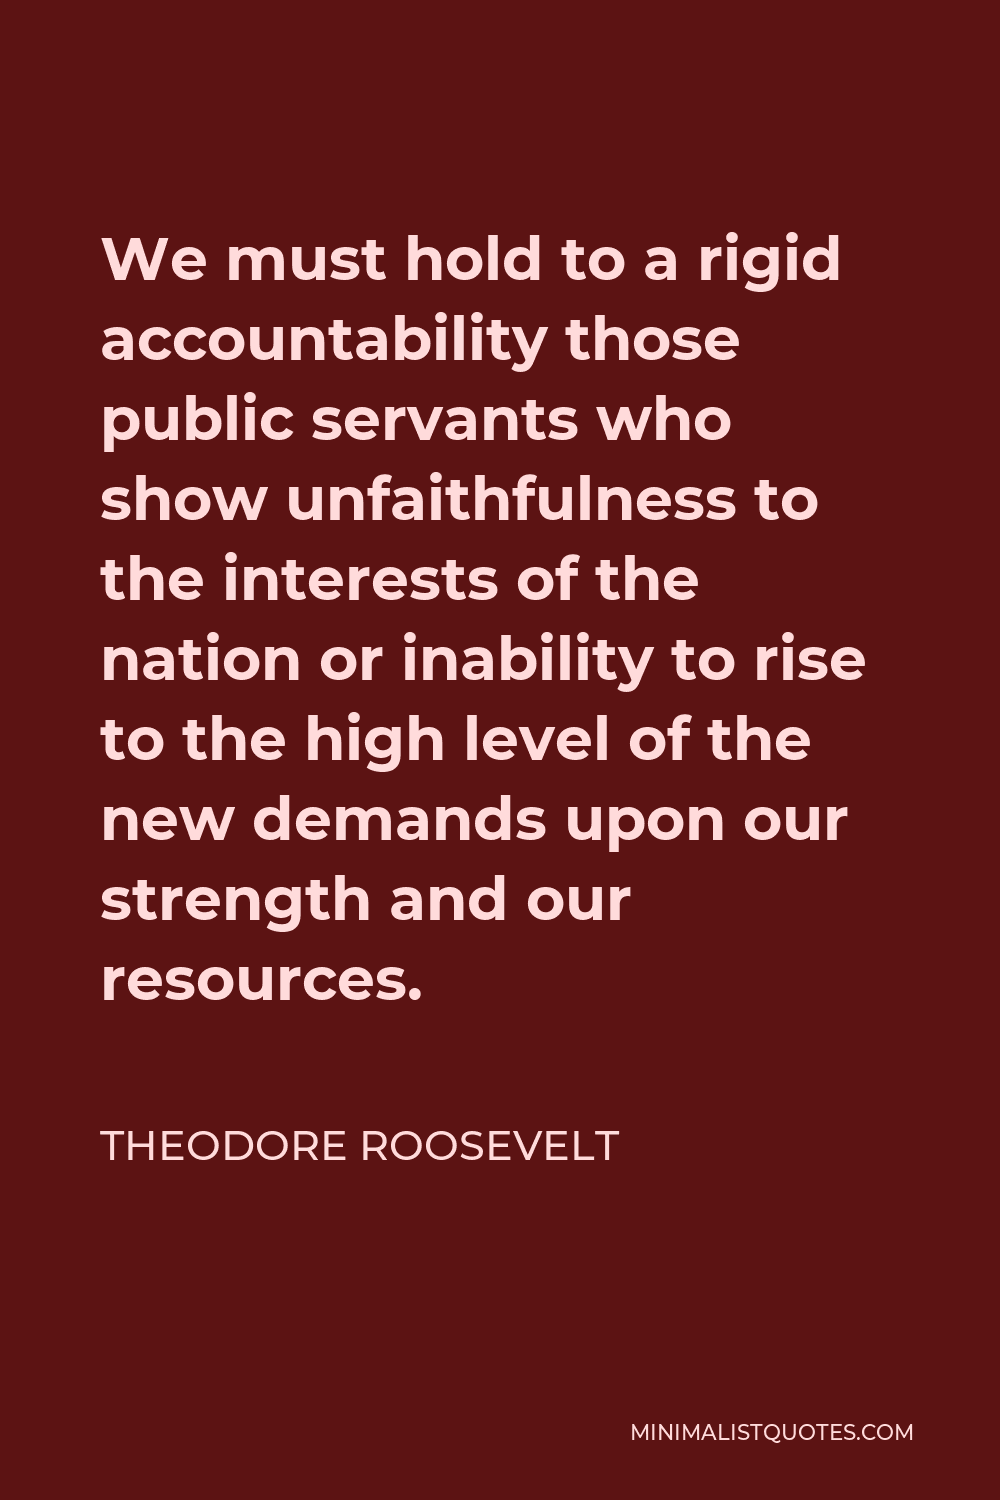 Theodore Roosevelt Quote - We must hold to a rigid accountability those public servants who show unfaithfulness to the interests of the nation or inability to rise to the high level of the new demands upon our strength and our resources.